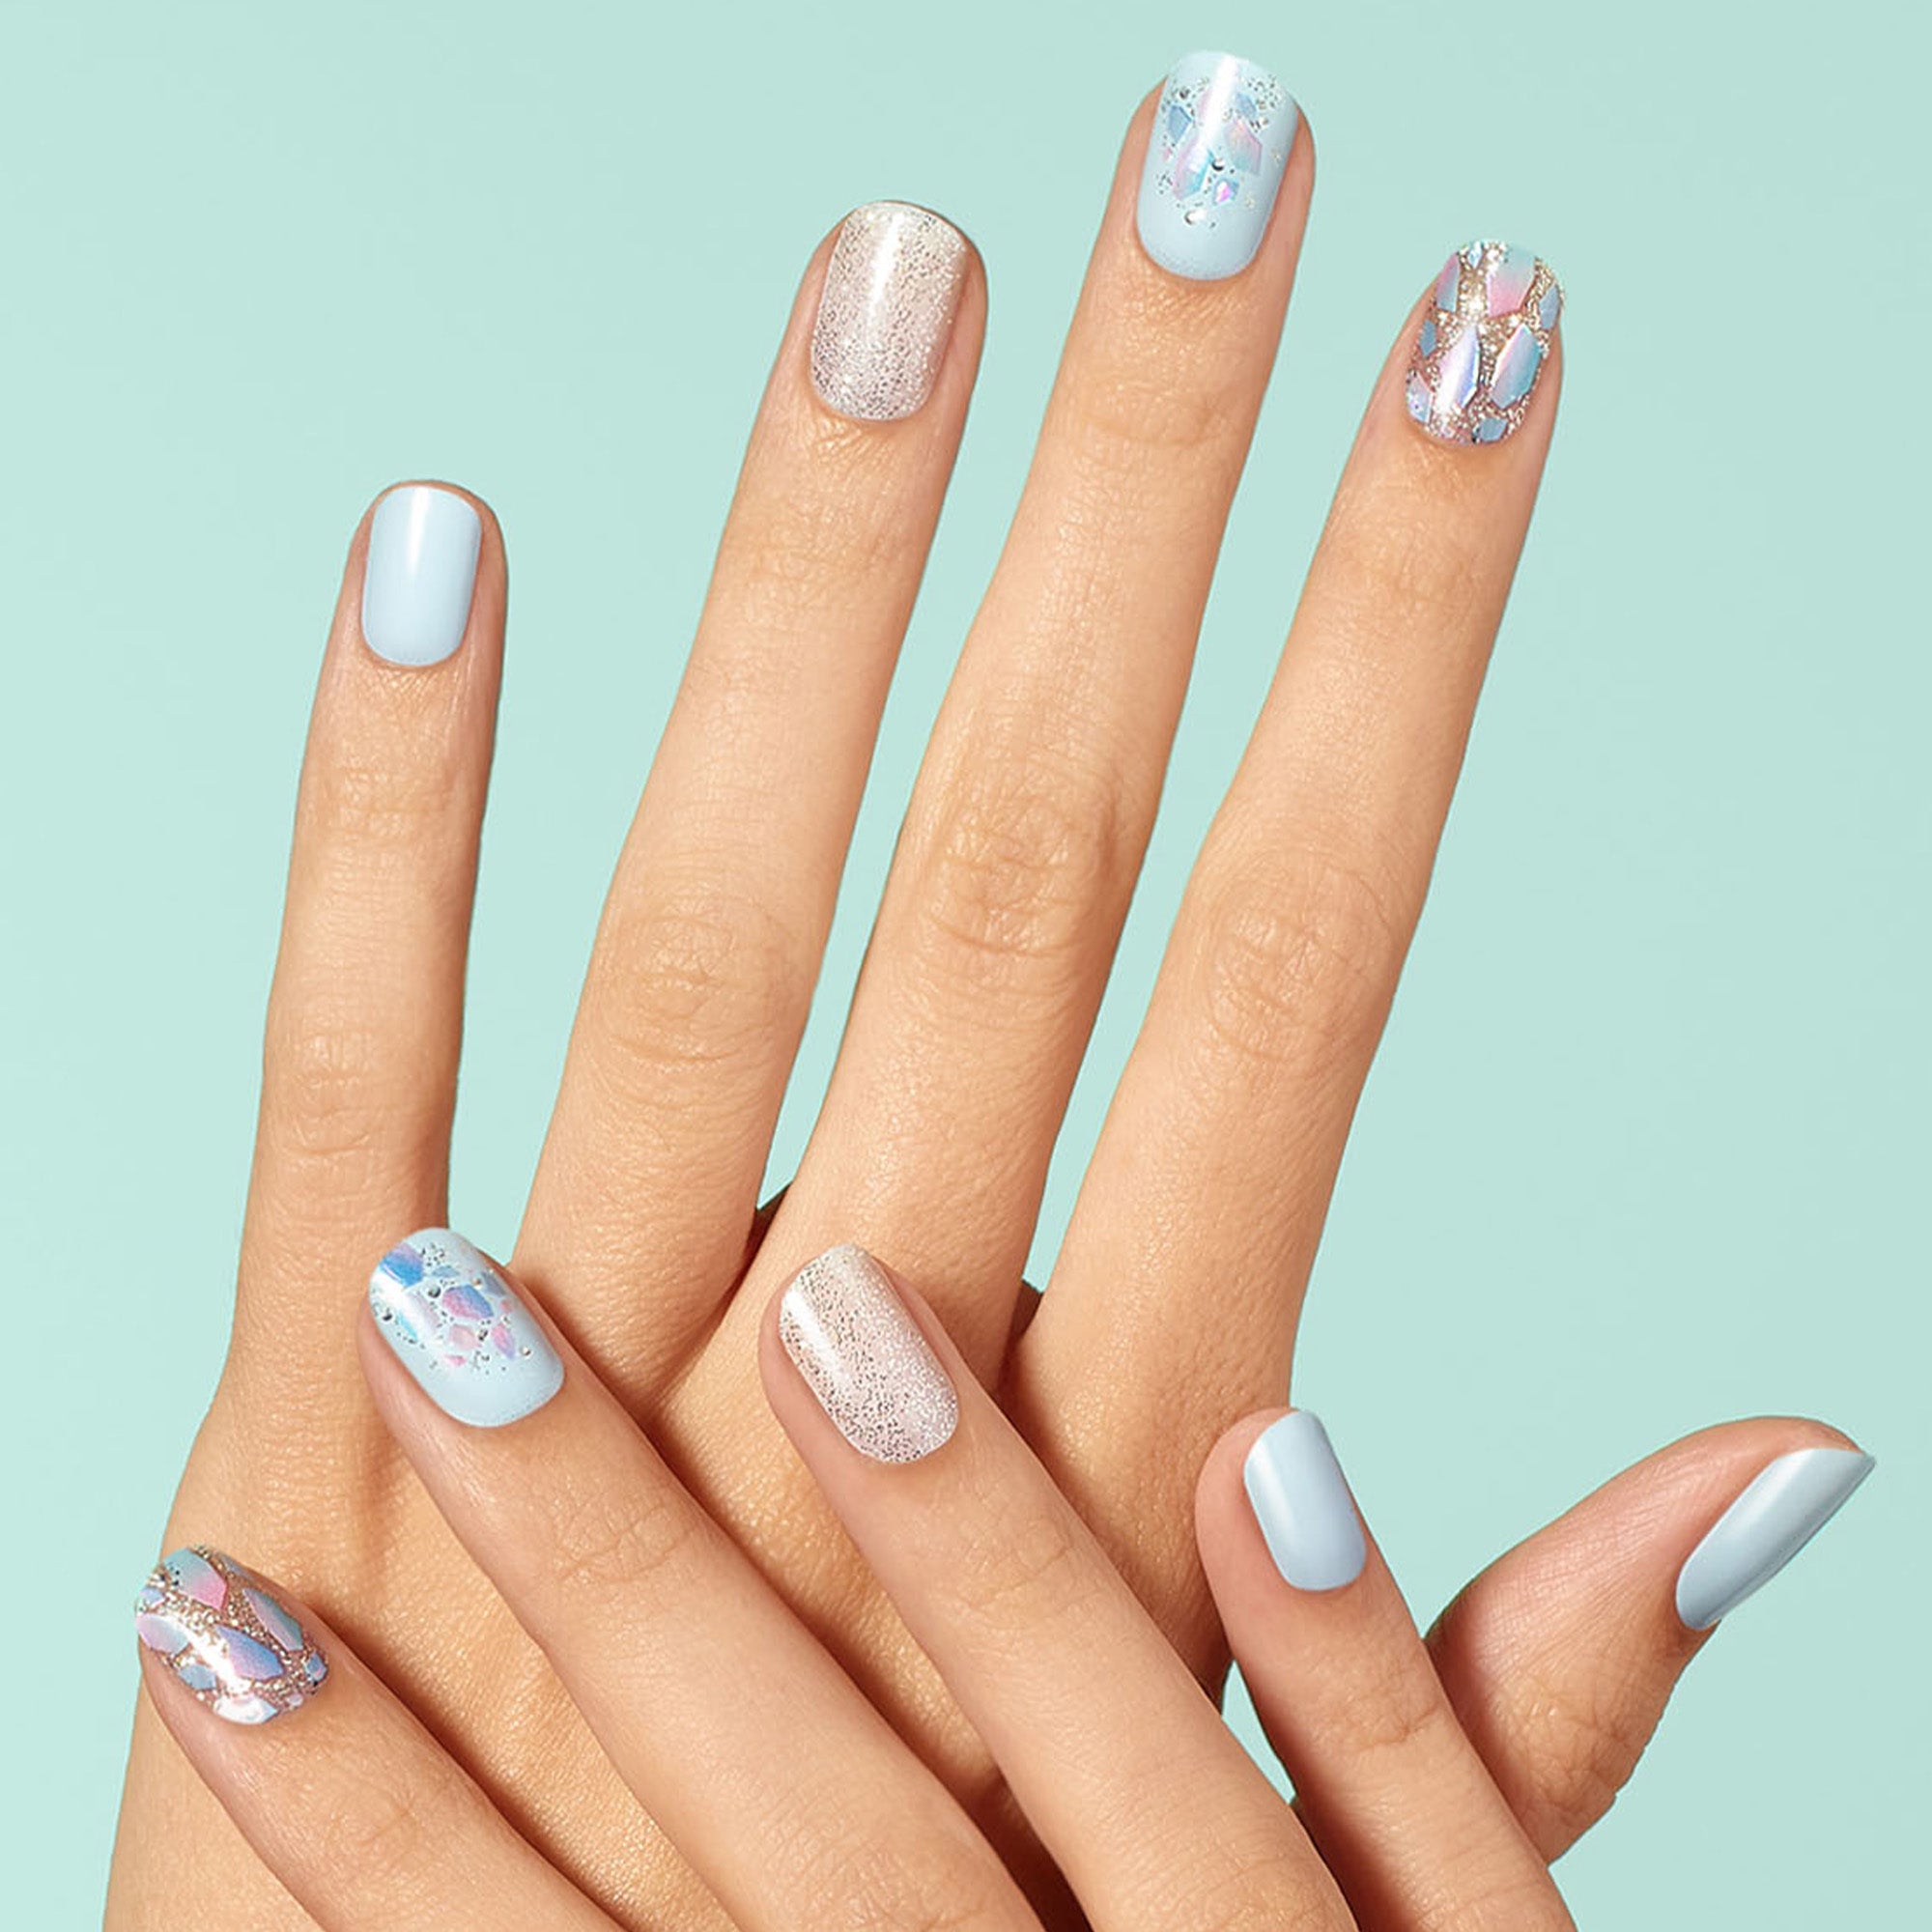 Dashing Diva GLOSS Nuclear Nova light blue gel nail strips with mosaic, shattered glass, and glitter accents.